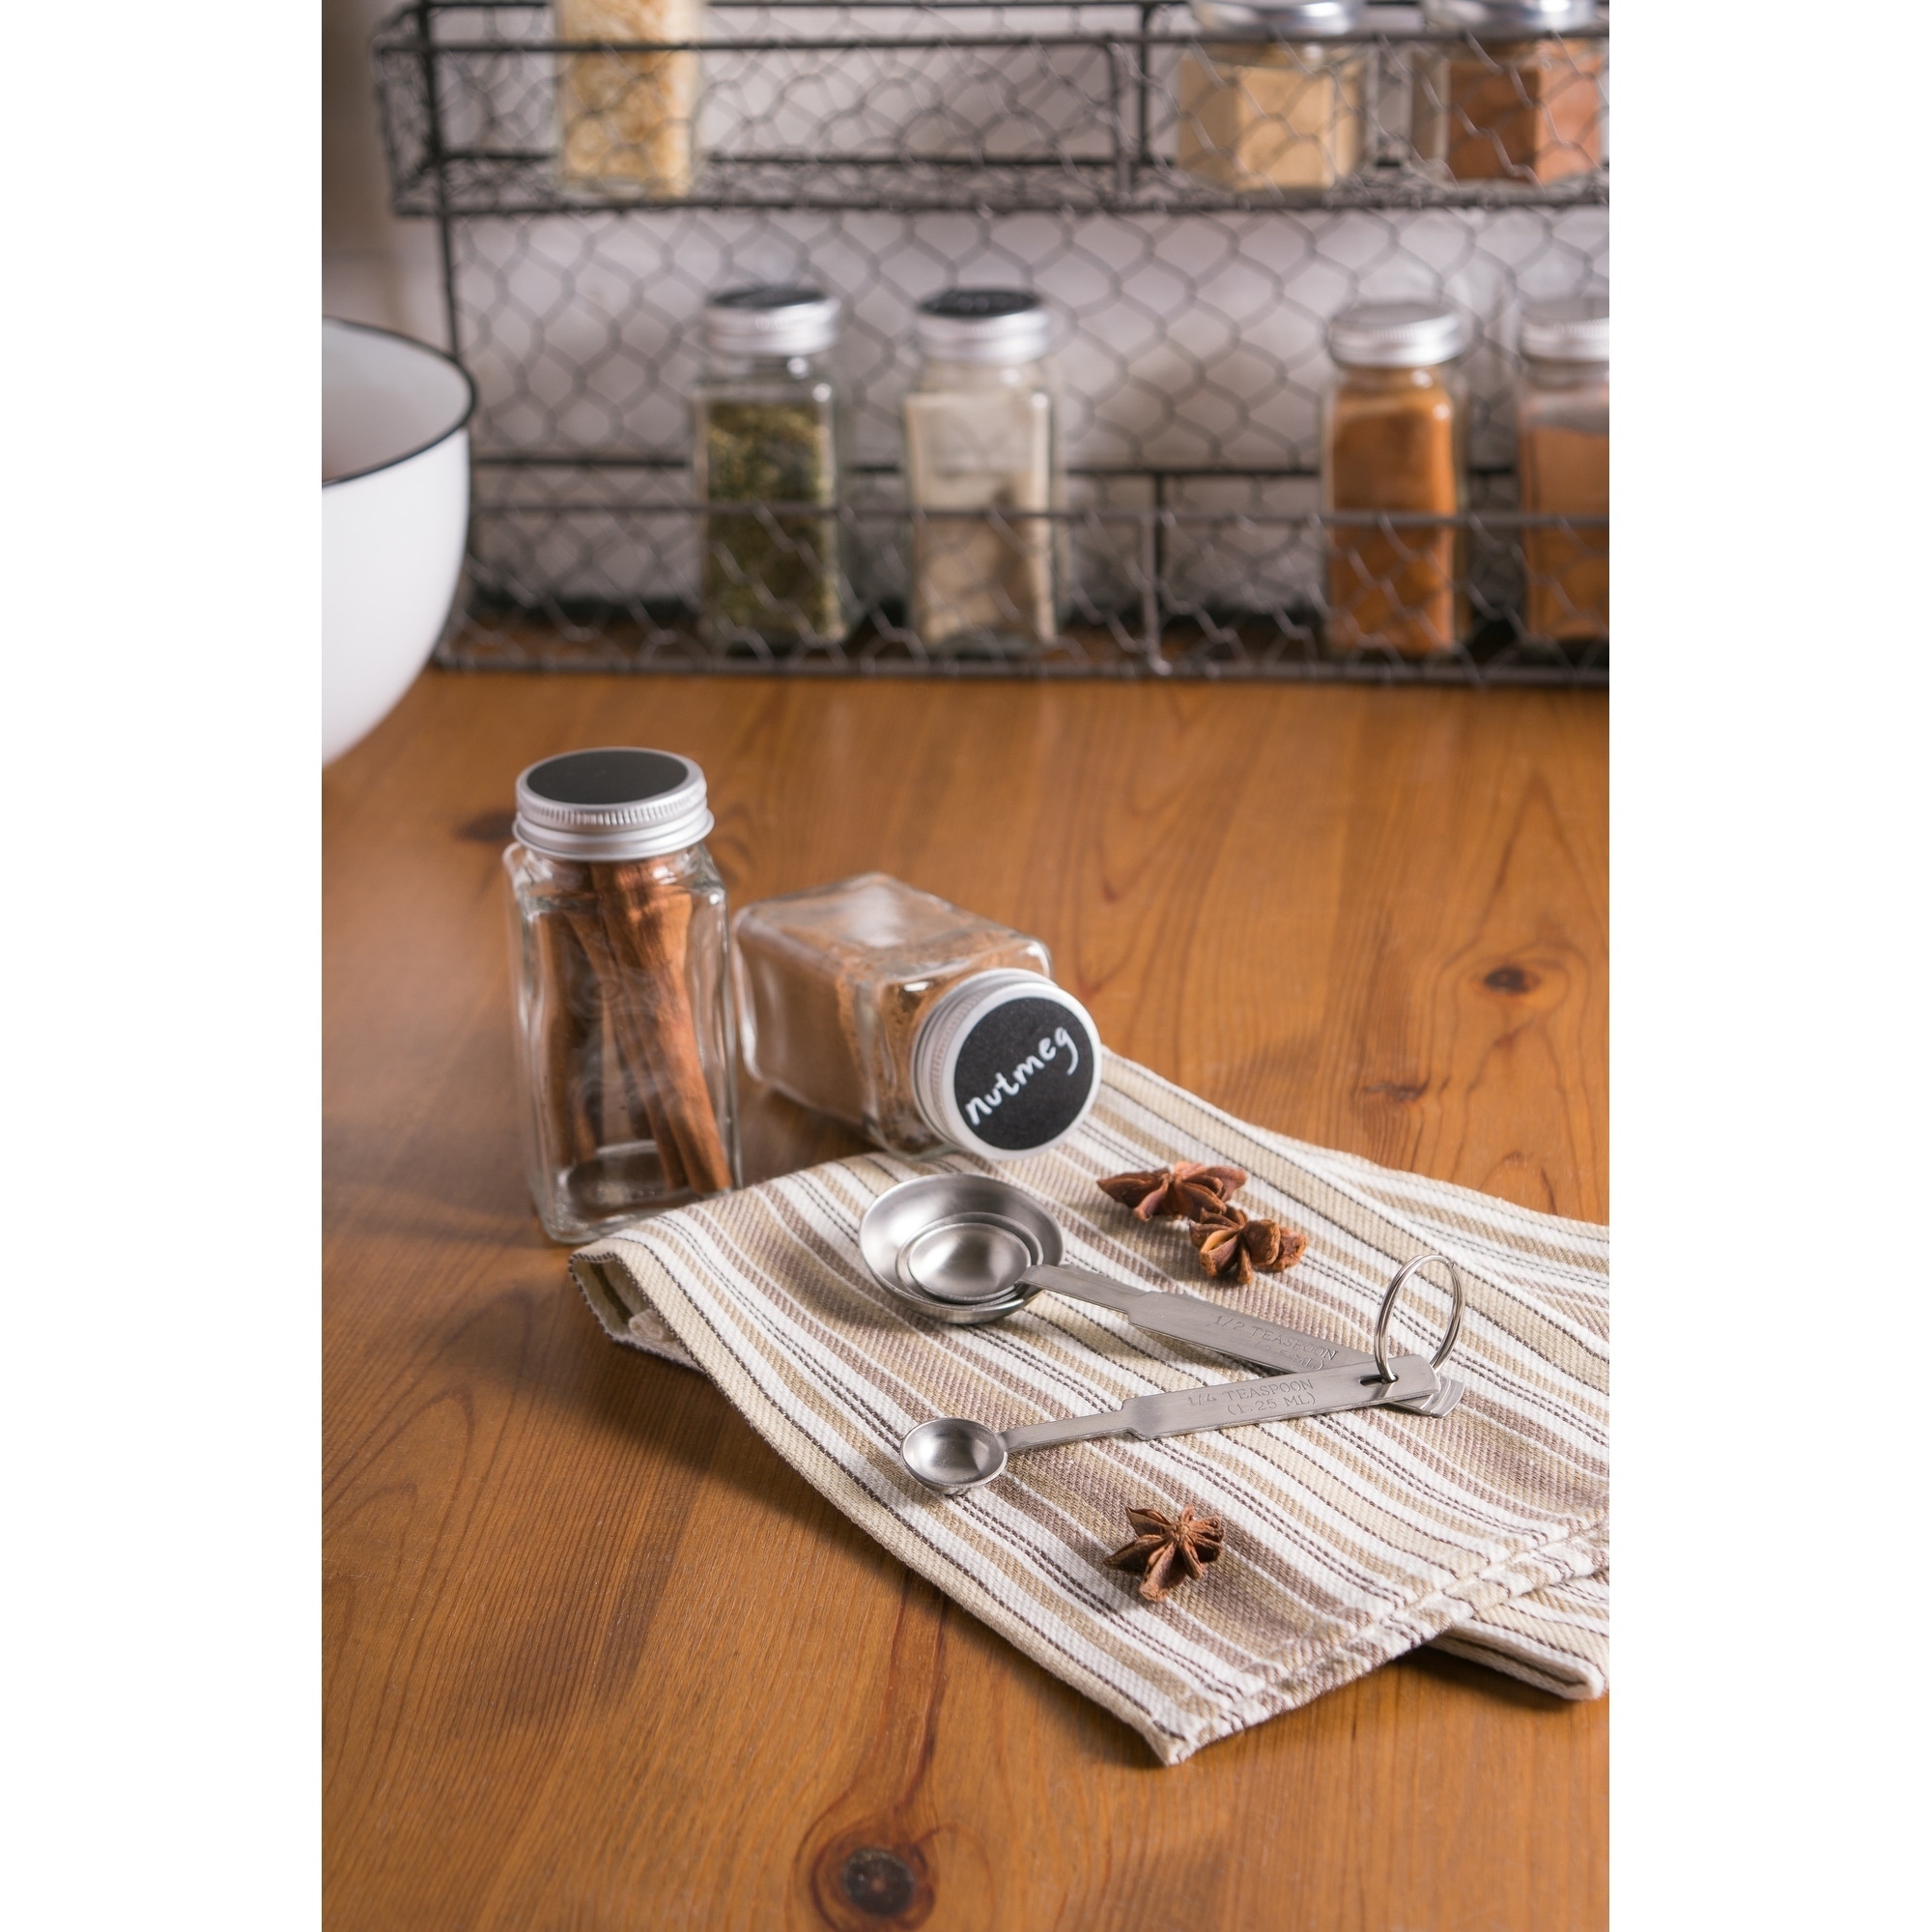 https://ak1.ostkcdn.com/images/products/28524010/DII-12-Piece-Spice-Jar-Set-With-Chalkboard-Labels-Tall-Spice-Jars-e0e9a493-180c-415a-9c13-ce255dc63cce.jpg